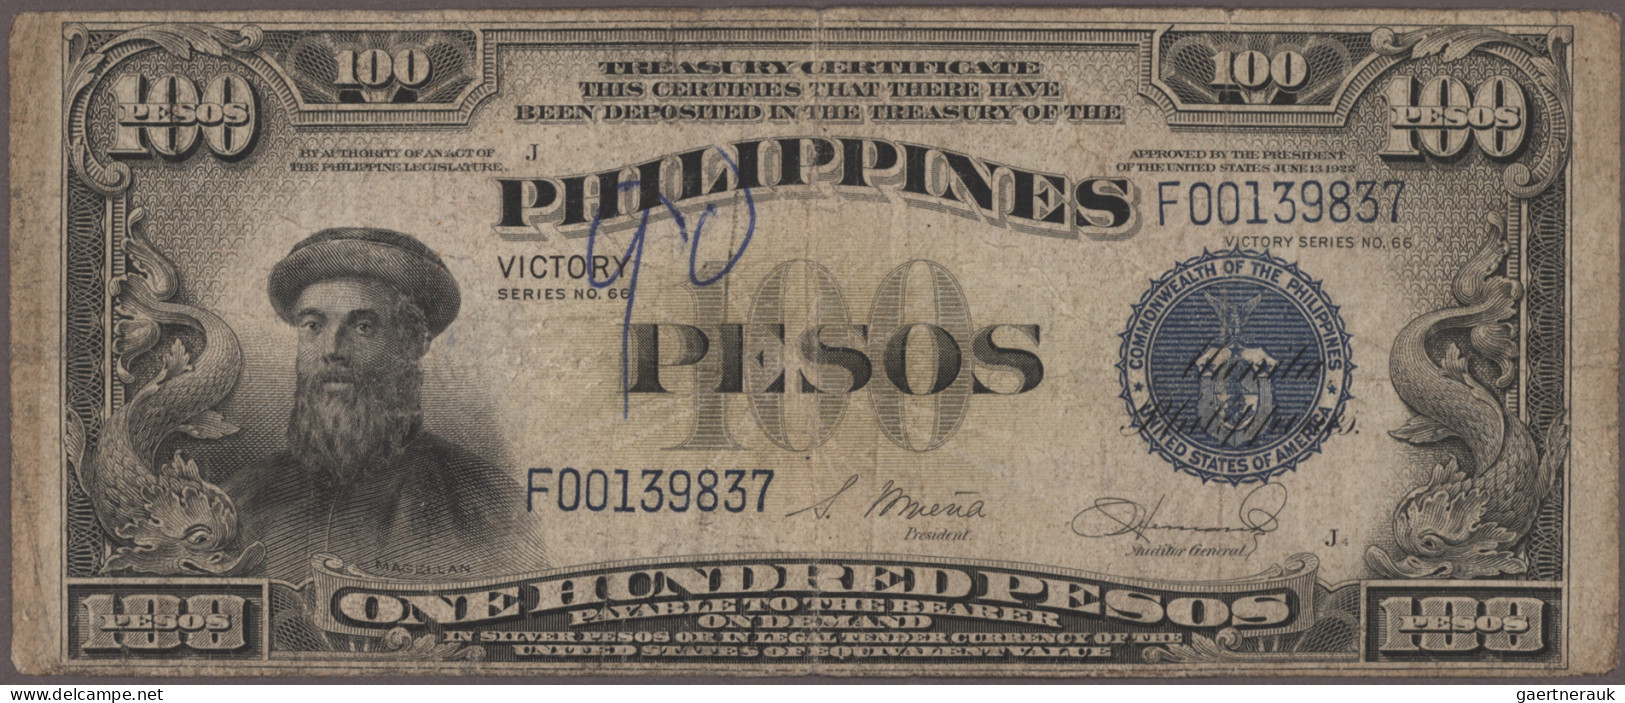 Philippines: Bank Of The Philippine Islands And Central Bank Of The Philippines, - Filippine